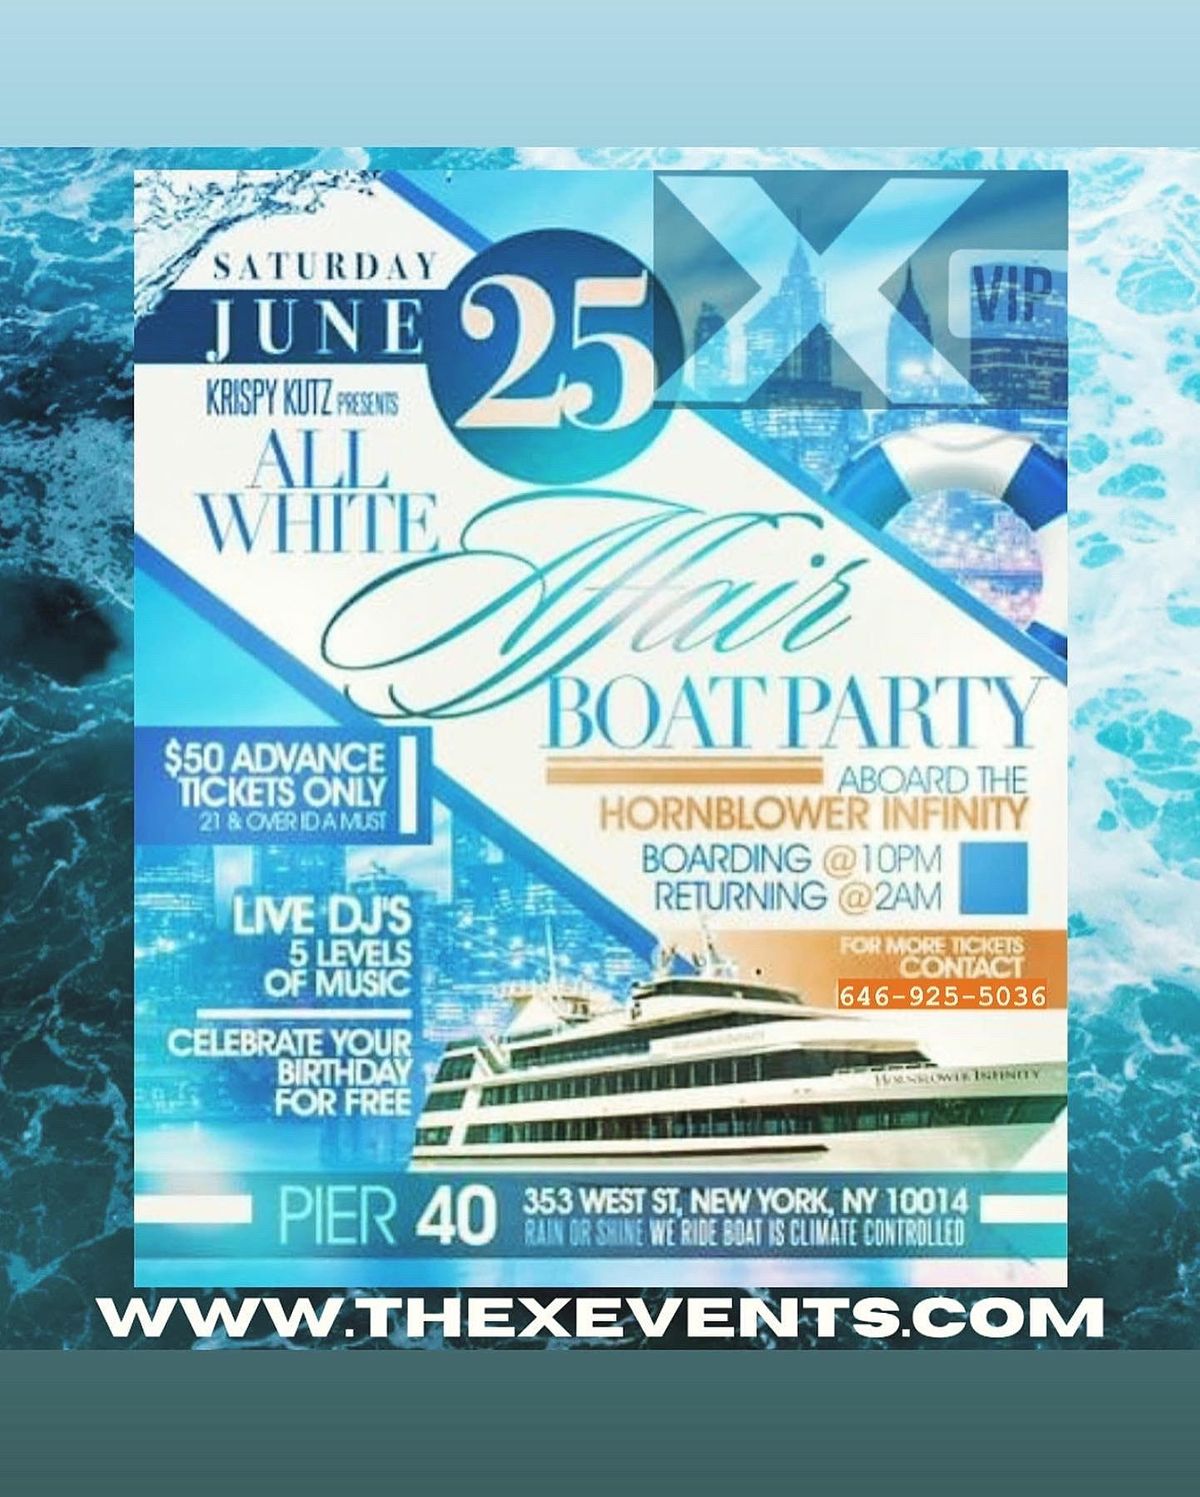 All White Affair Boat Party